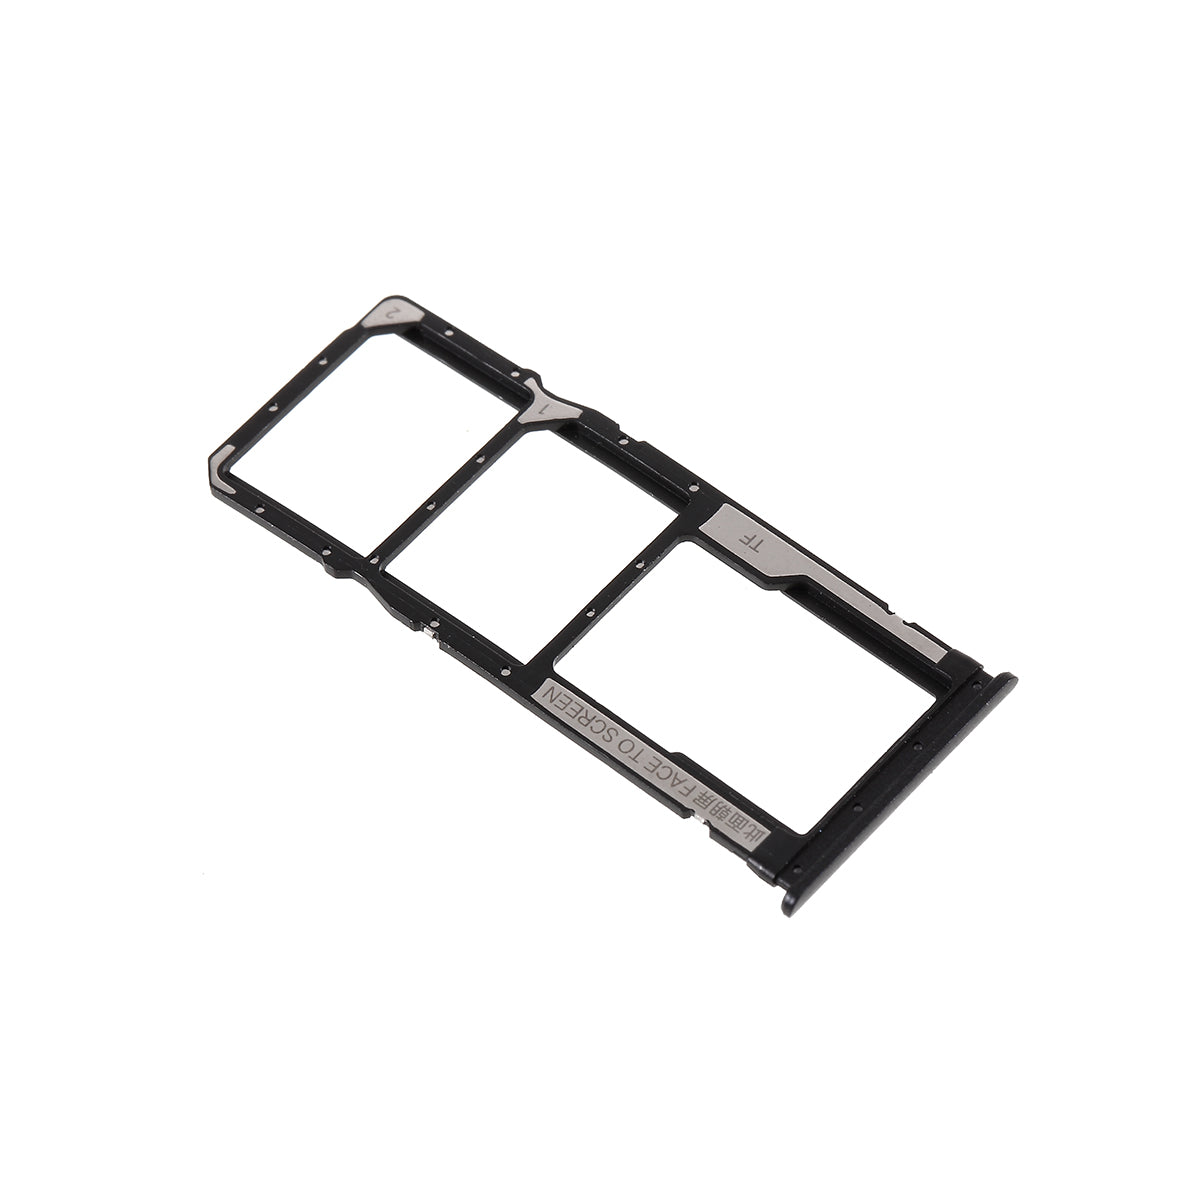 OEM Dual SIM Card Tray Holder Replace Part for Xiaomi Redmi 7